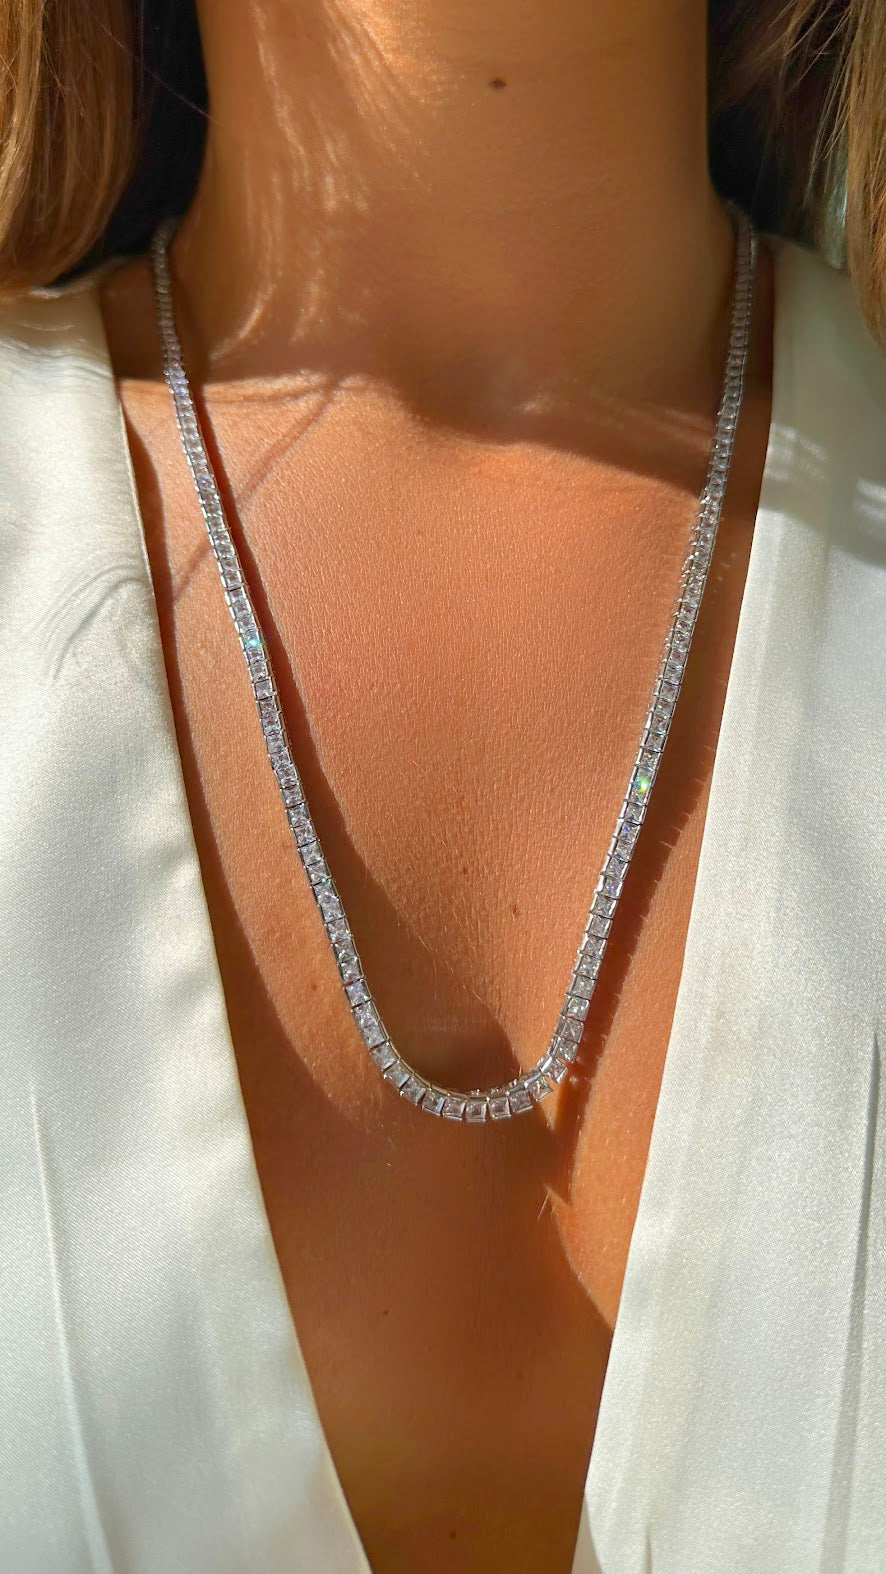 Tennis necklace with white squares zirconia 23.6 inch (Riviera)